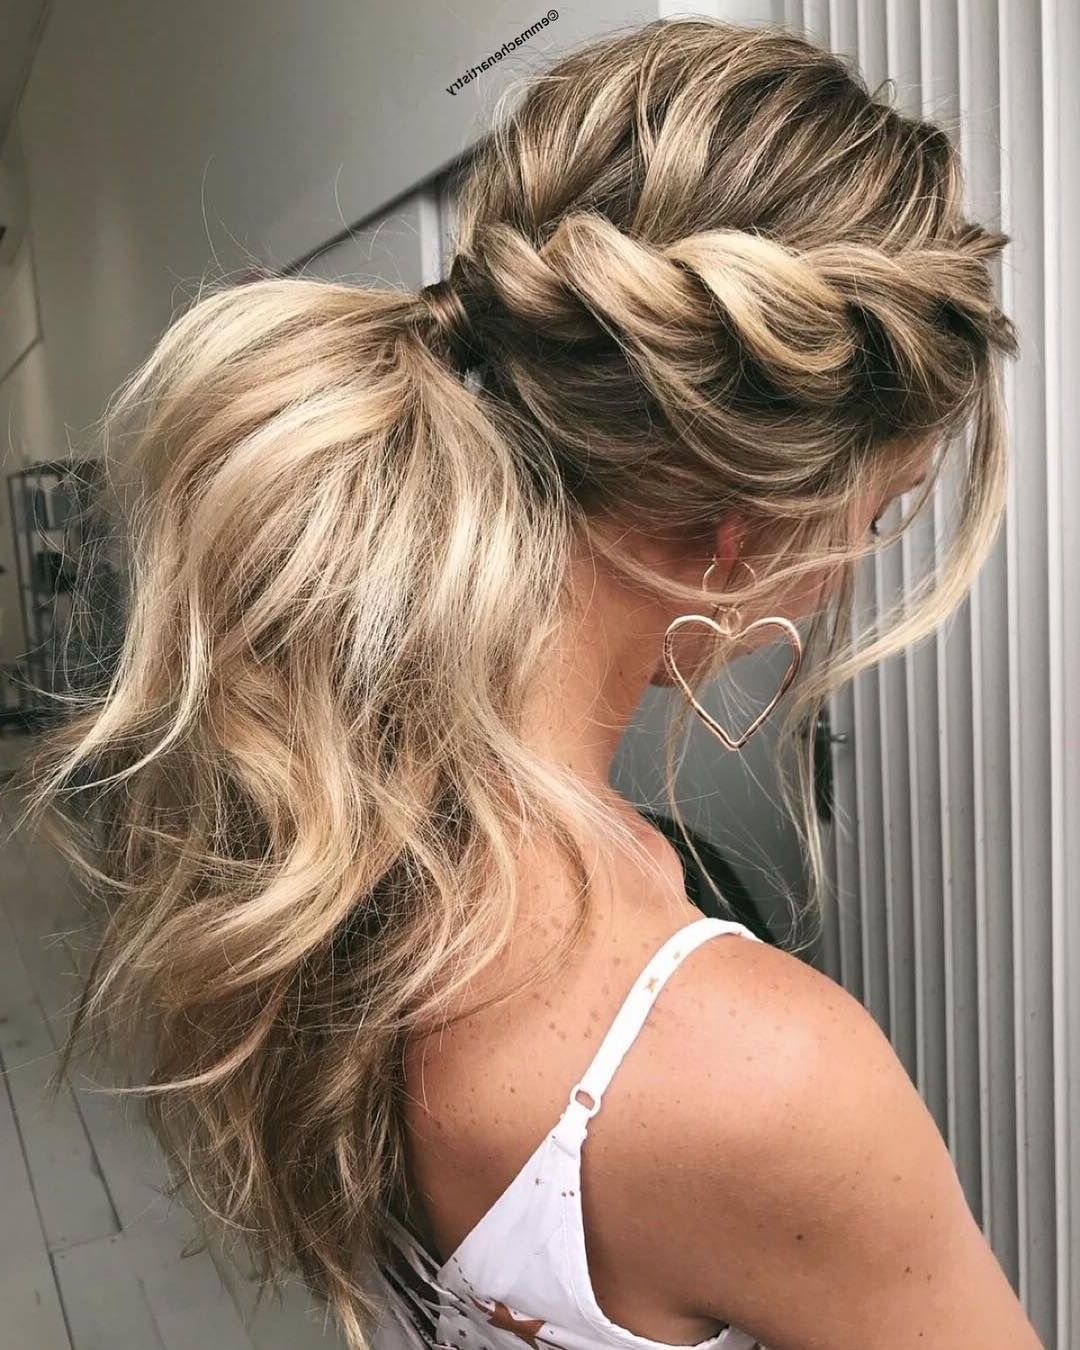 Twist + Ponytail Hairstyle Ideas #braids #hairstyles #hairstyle Intended For Recent Voluminous Chignon Wedding Hairstyles With Twists (View 5 of 20)